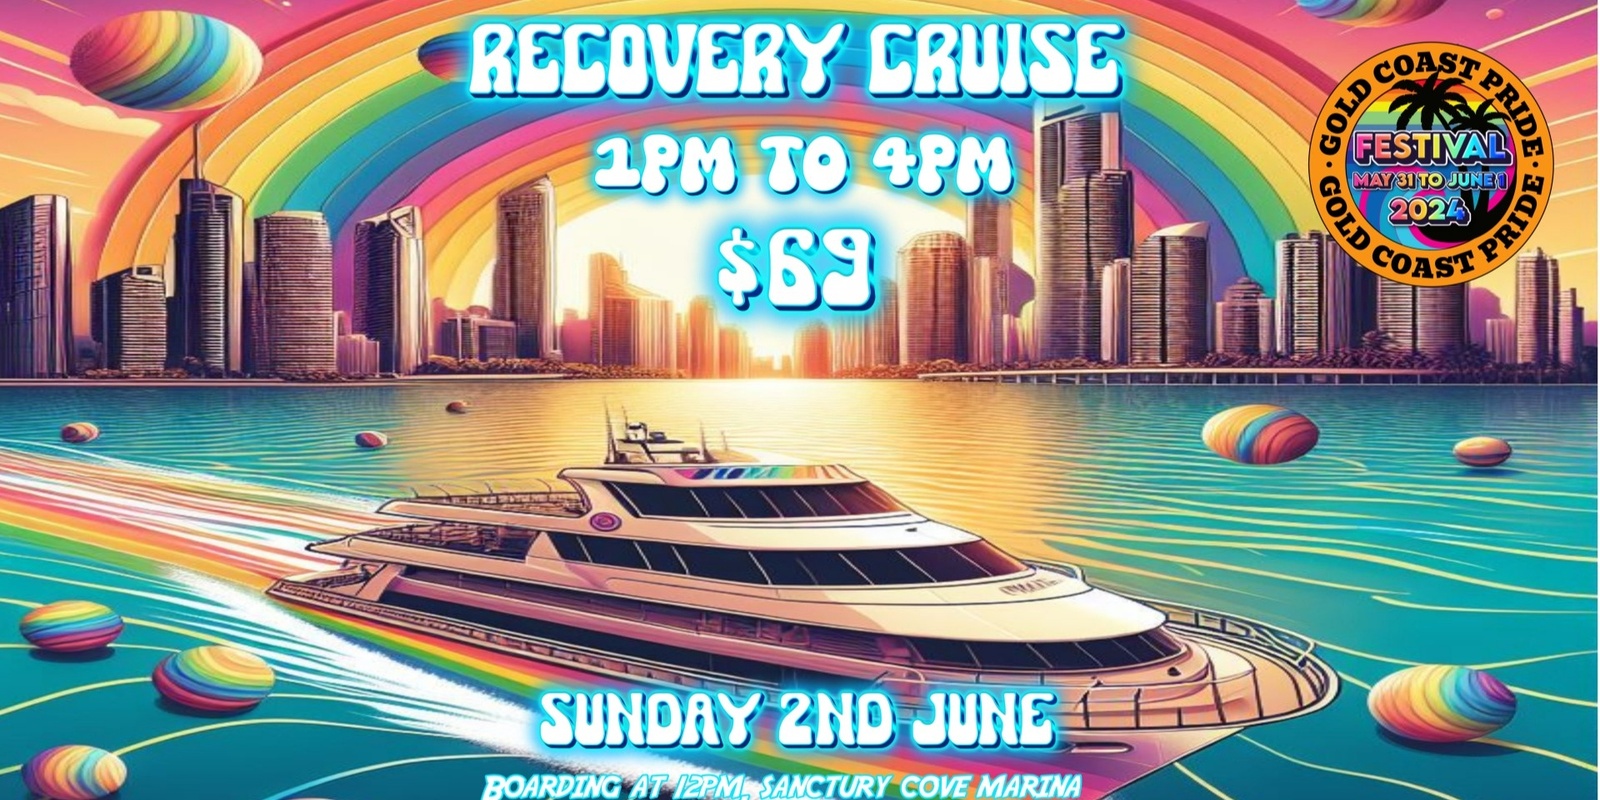 Banner image for Gold Coast Pride Recovery Cruise